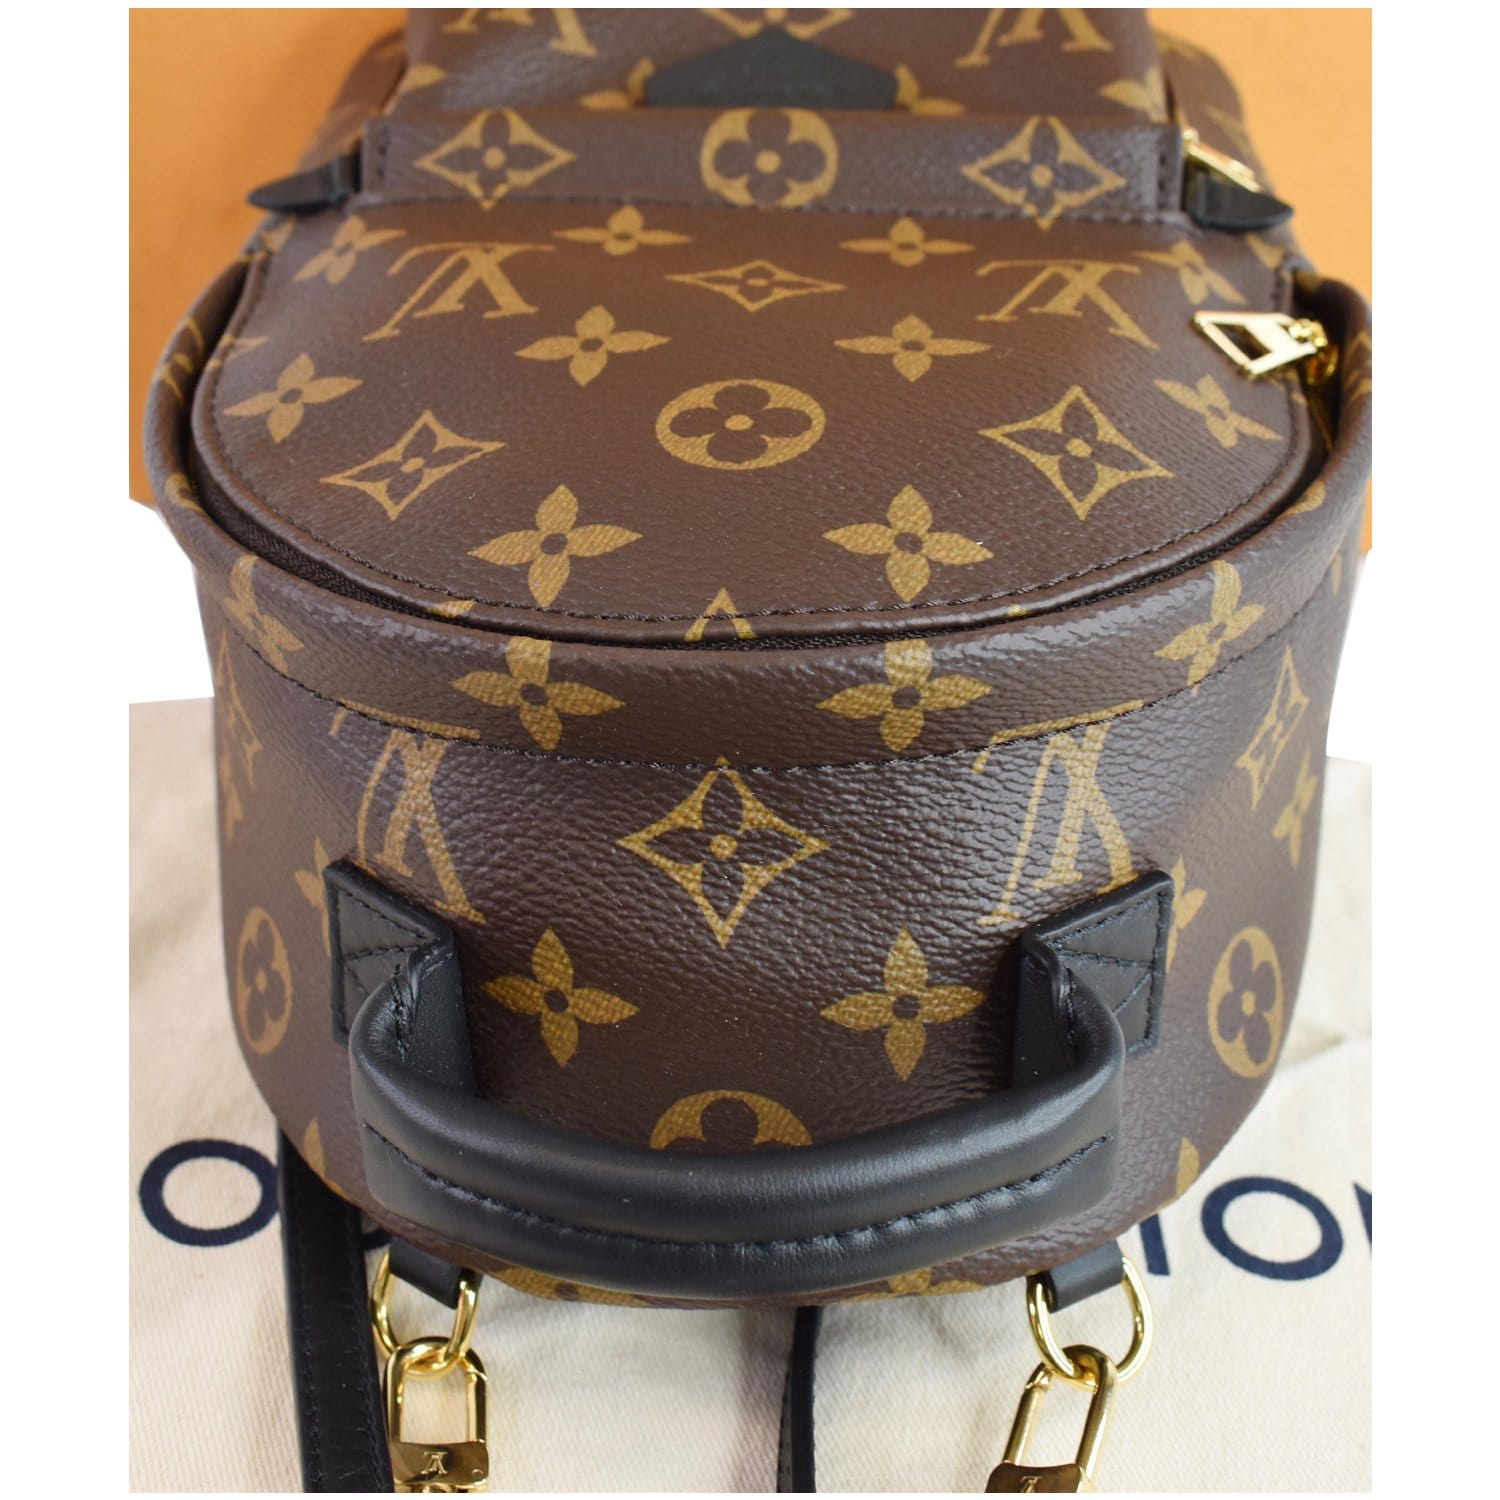 Palm springs cloth backpack Louis Vuitton Brown in Cloth - 31038981